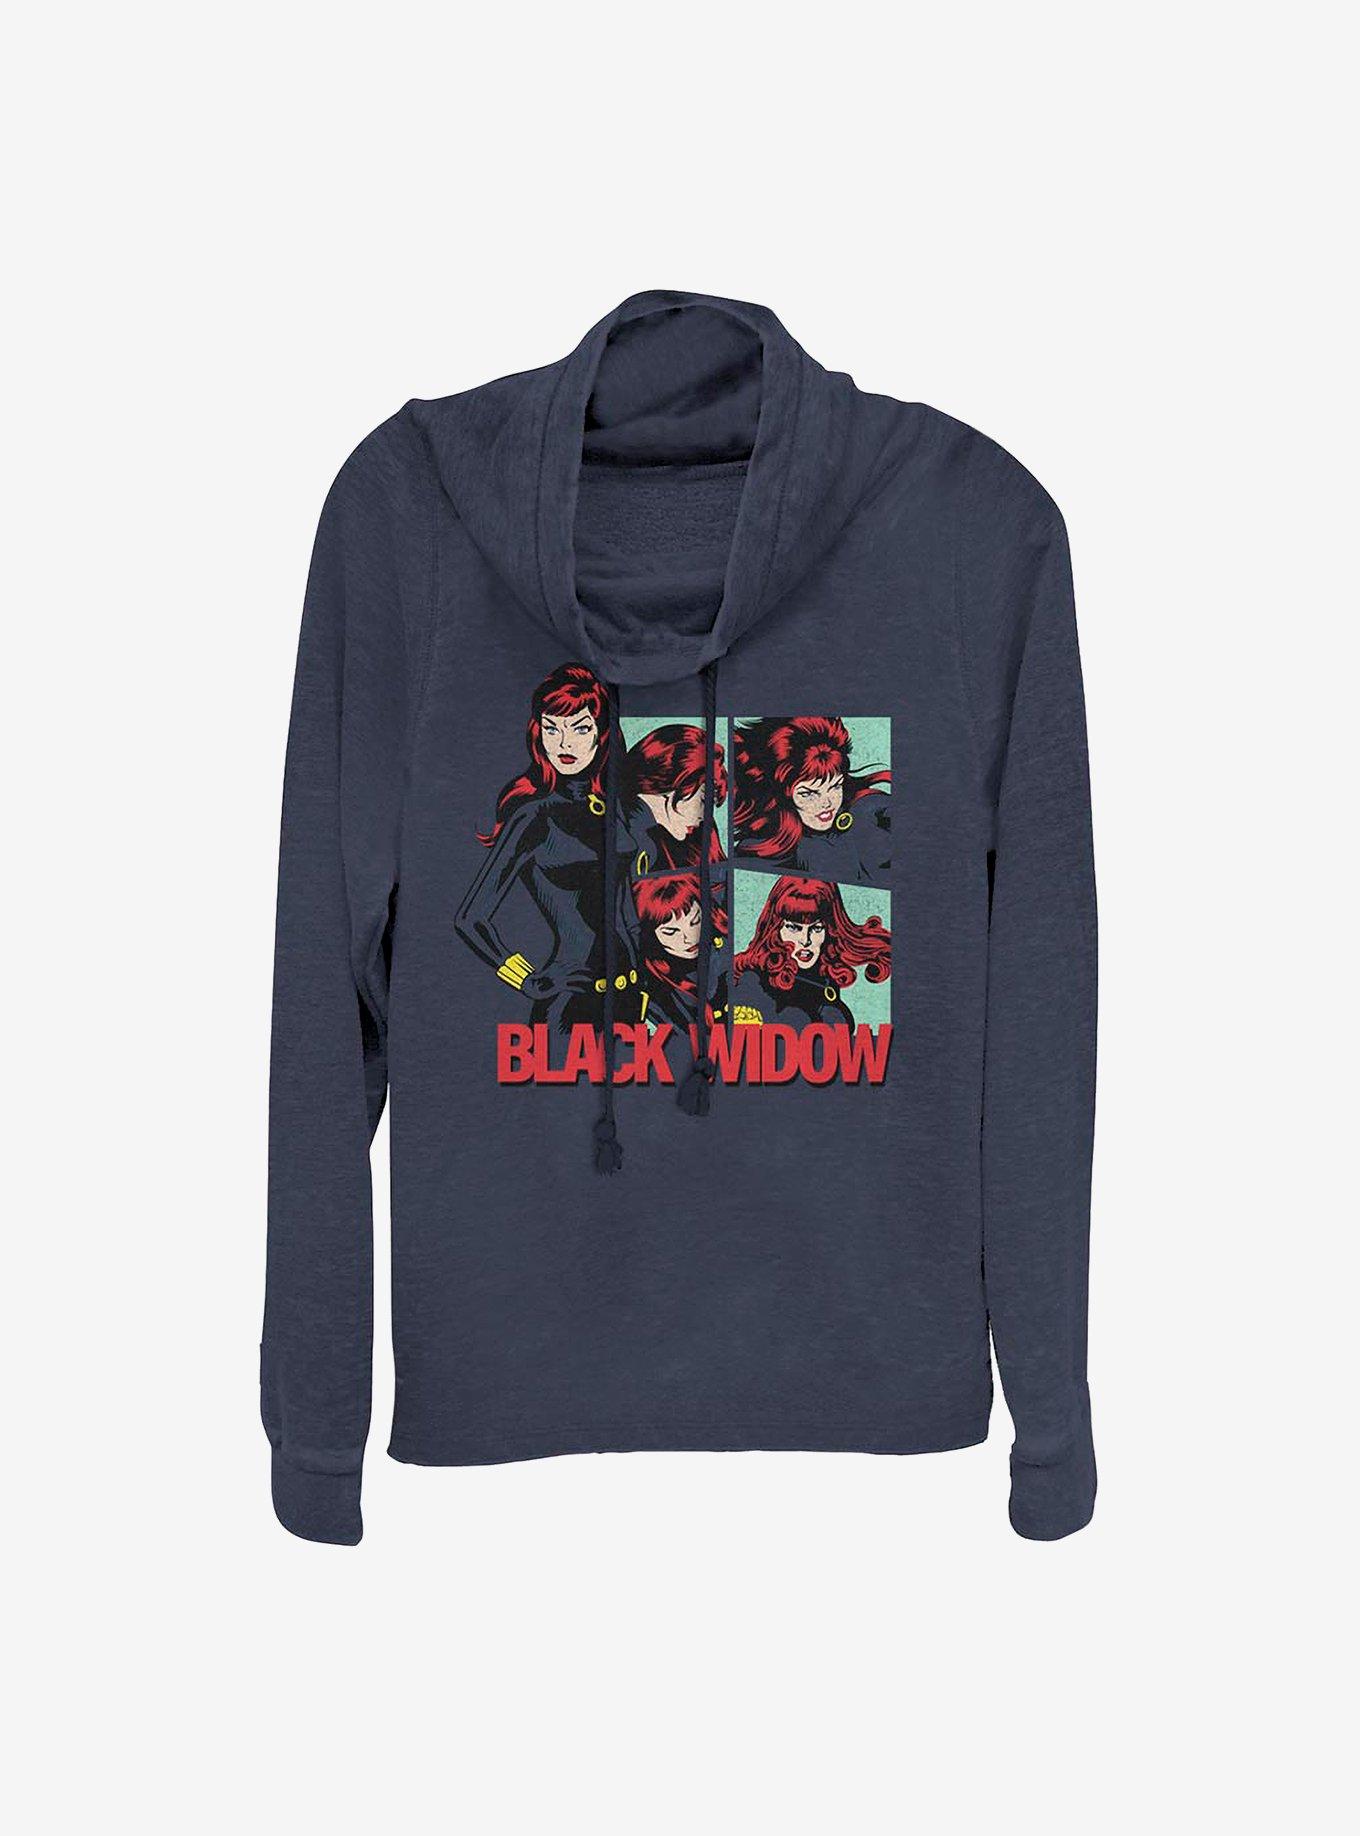 Marvel Black Widow Strong Woman Cowlneck Long-Sleeve Girls Top, NAVY, hi-res